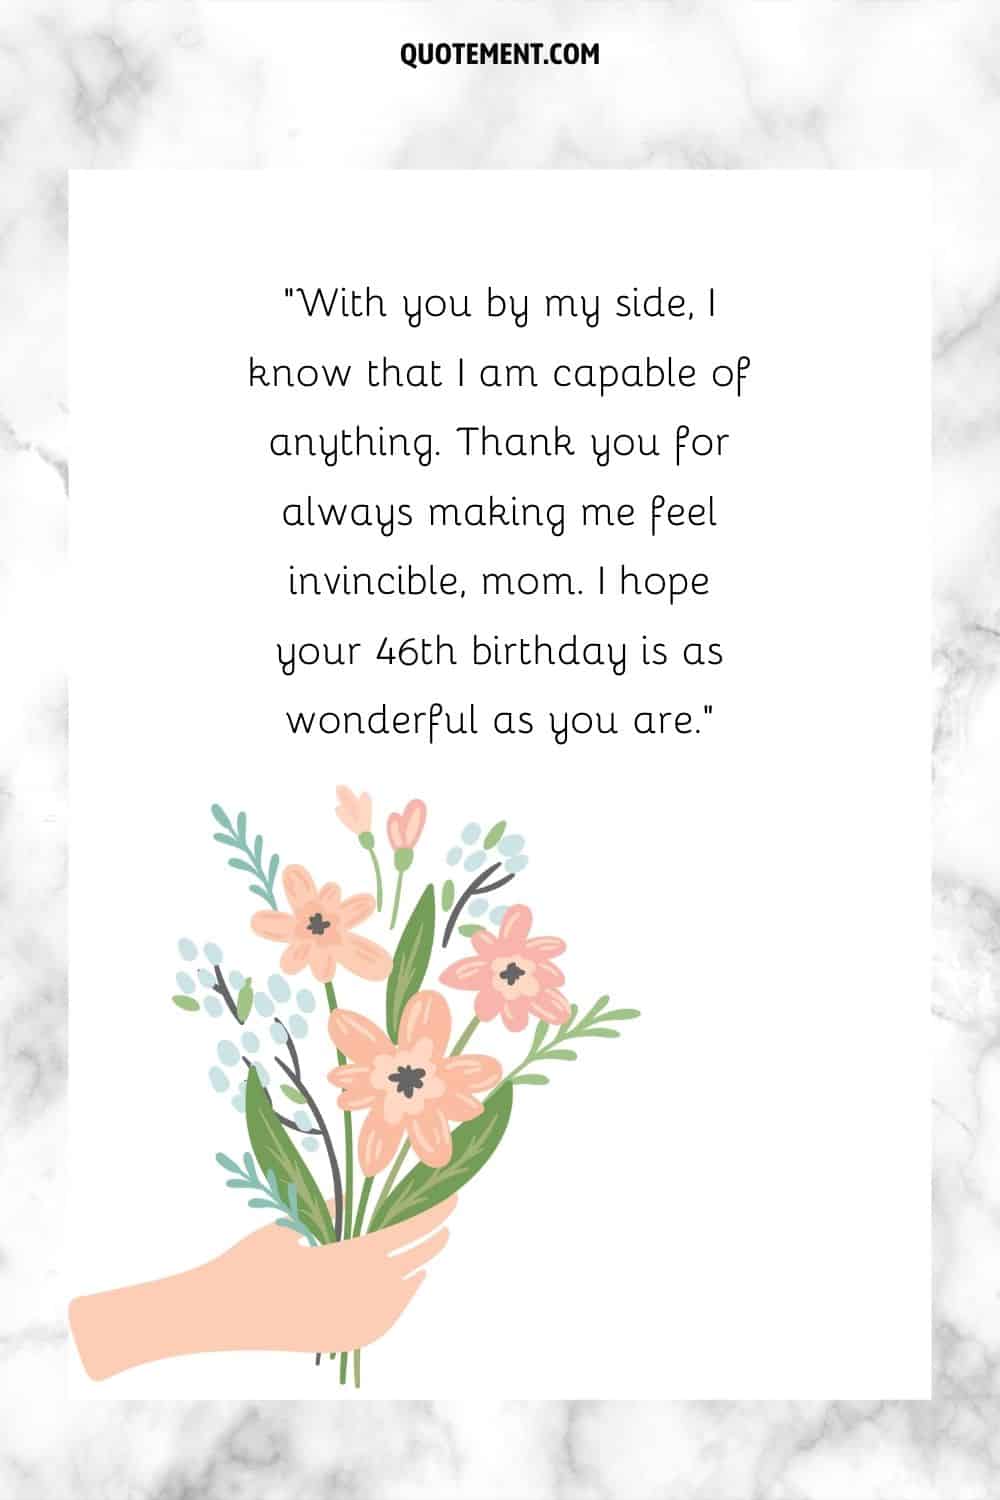 Message for a mom who turns 46 and a hand holding flowers